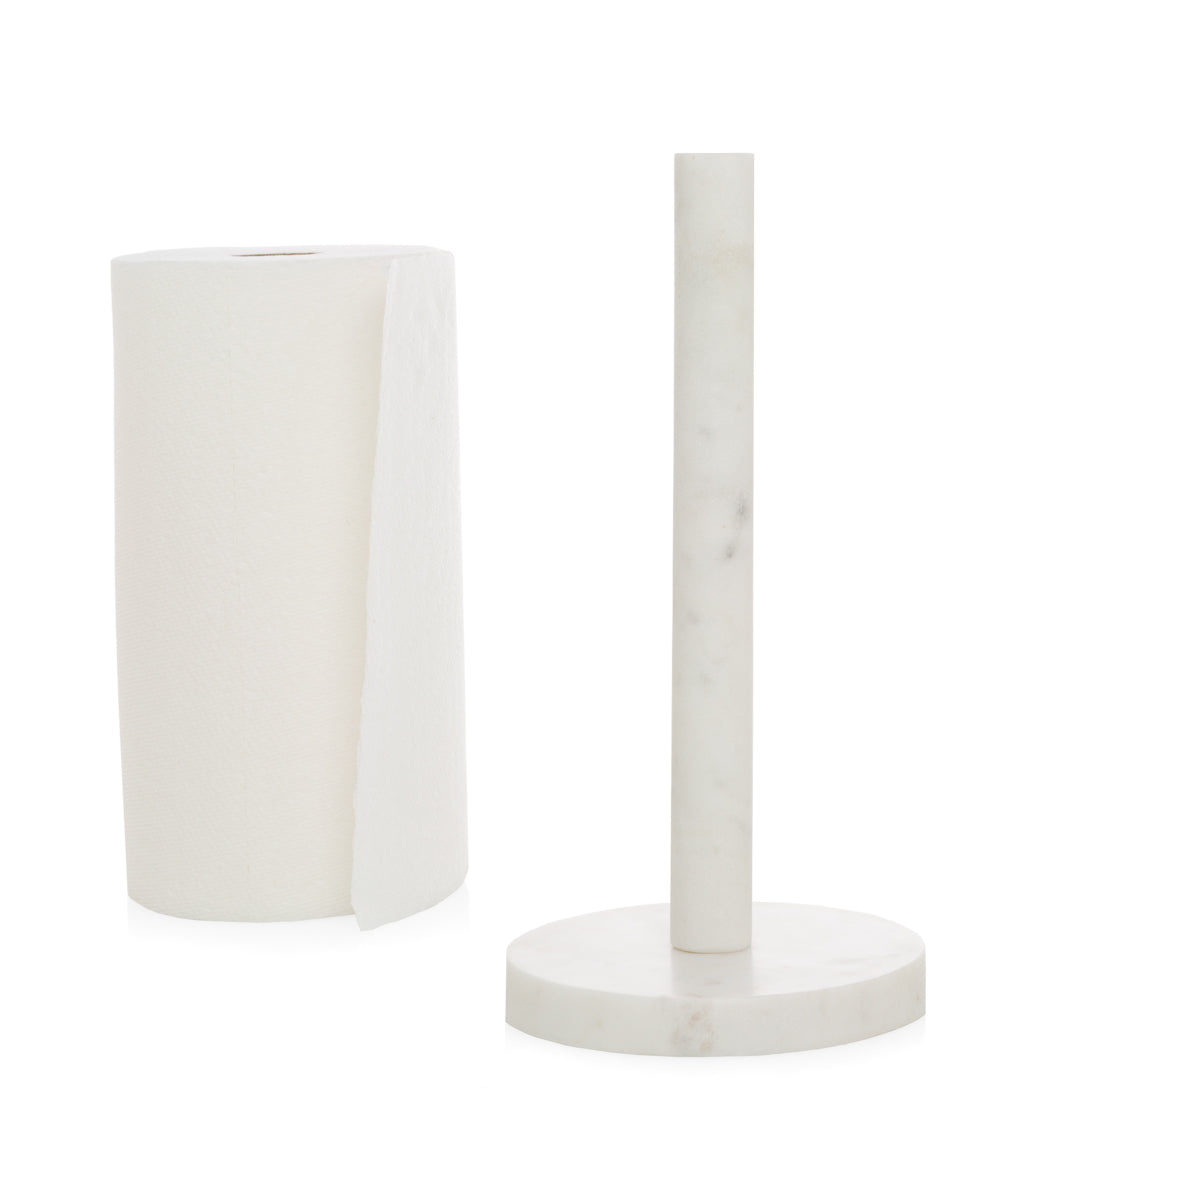 Paper Towel Holder On A White Marble Countertop Stock Photo